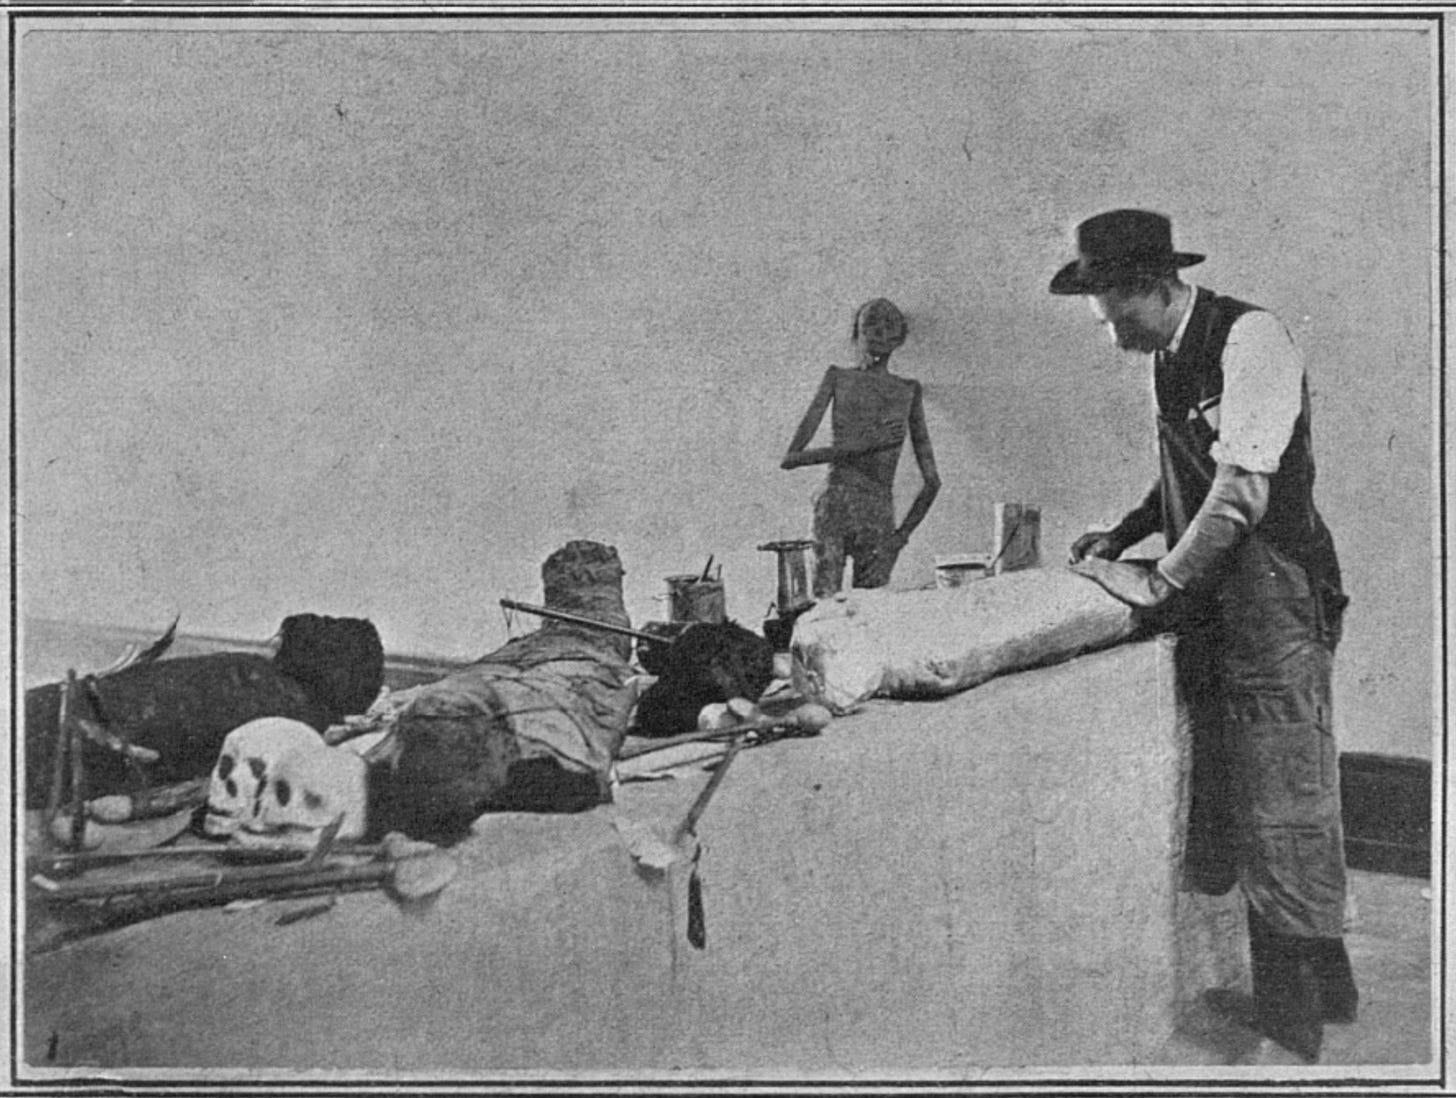 A man in early 20th-century American clothing stands at one end of a table where there are various unidentified objects. In the background, a human figure leans against a wall - its spindly arms and blank expression suggest it is a mummy.